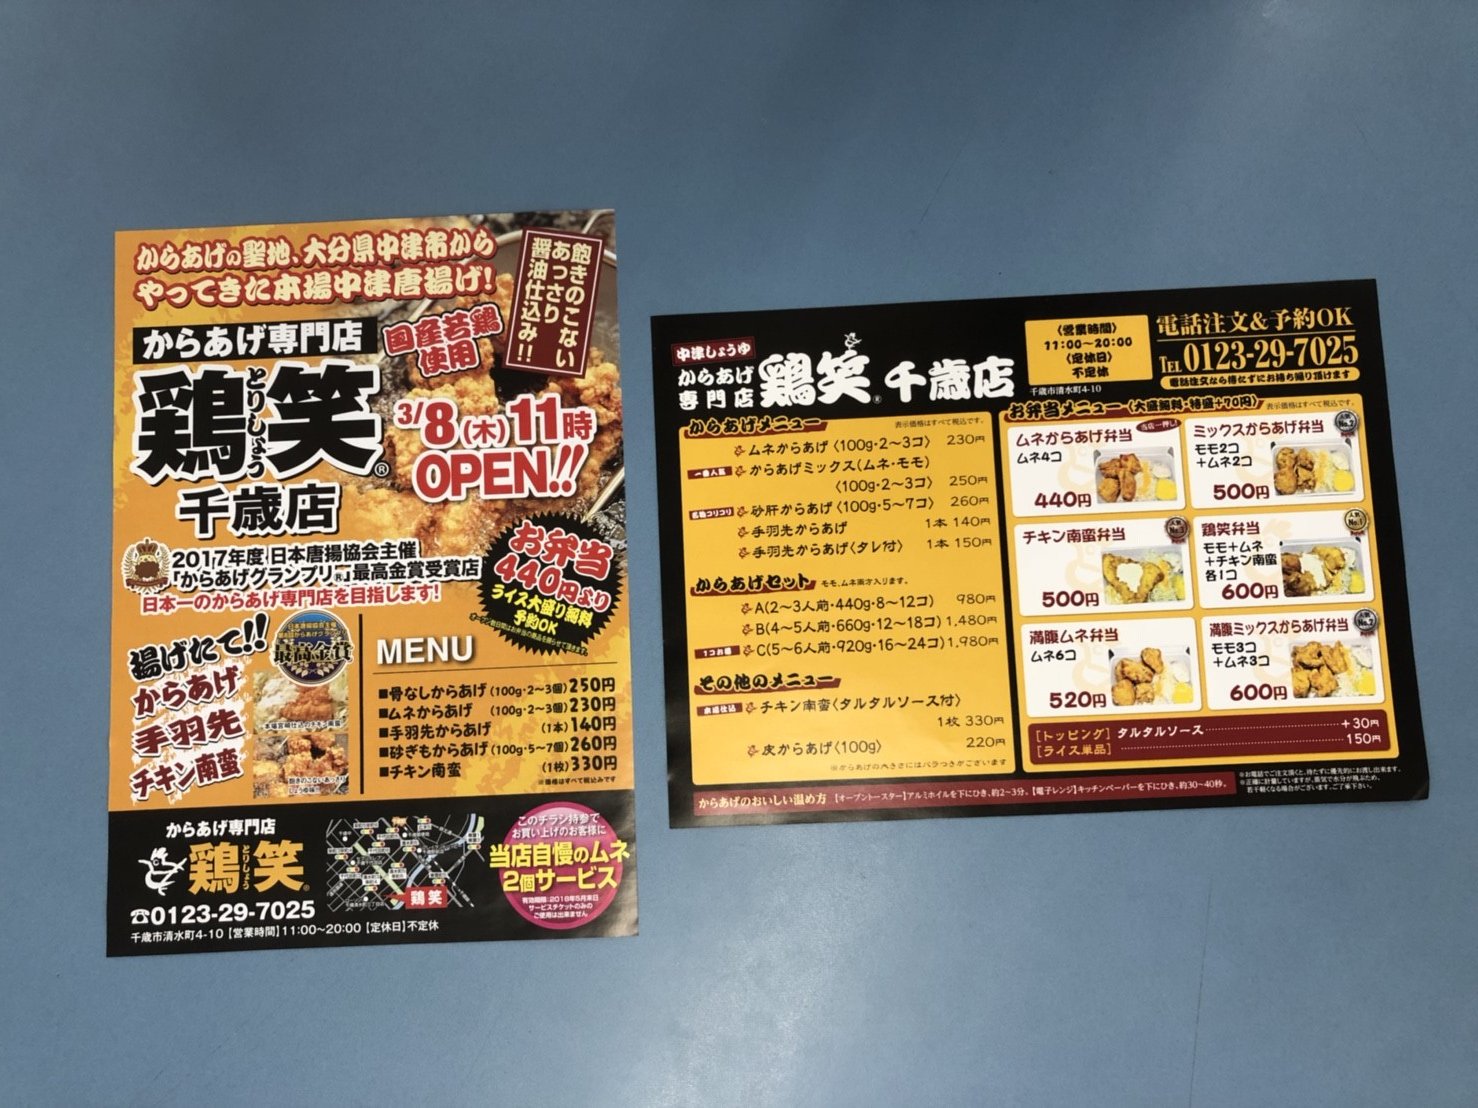 New Open 鶏笑 千歳店 千歳テナントステーション